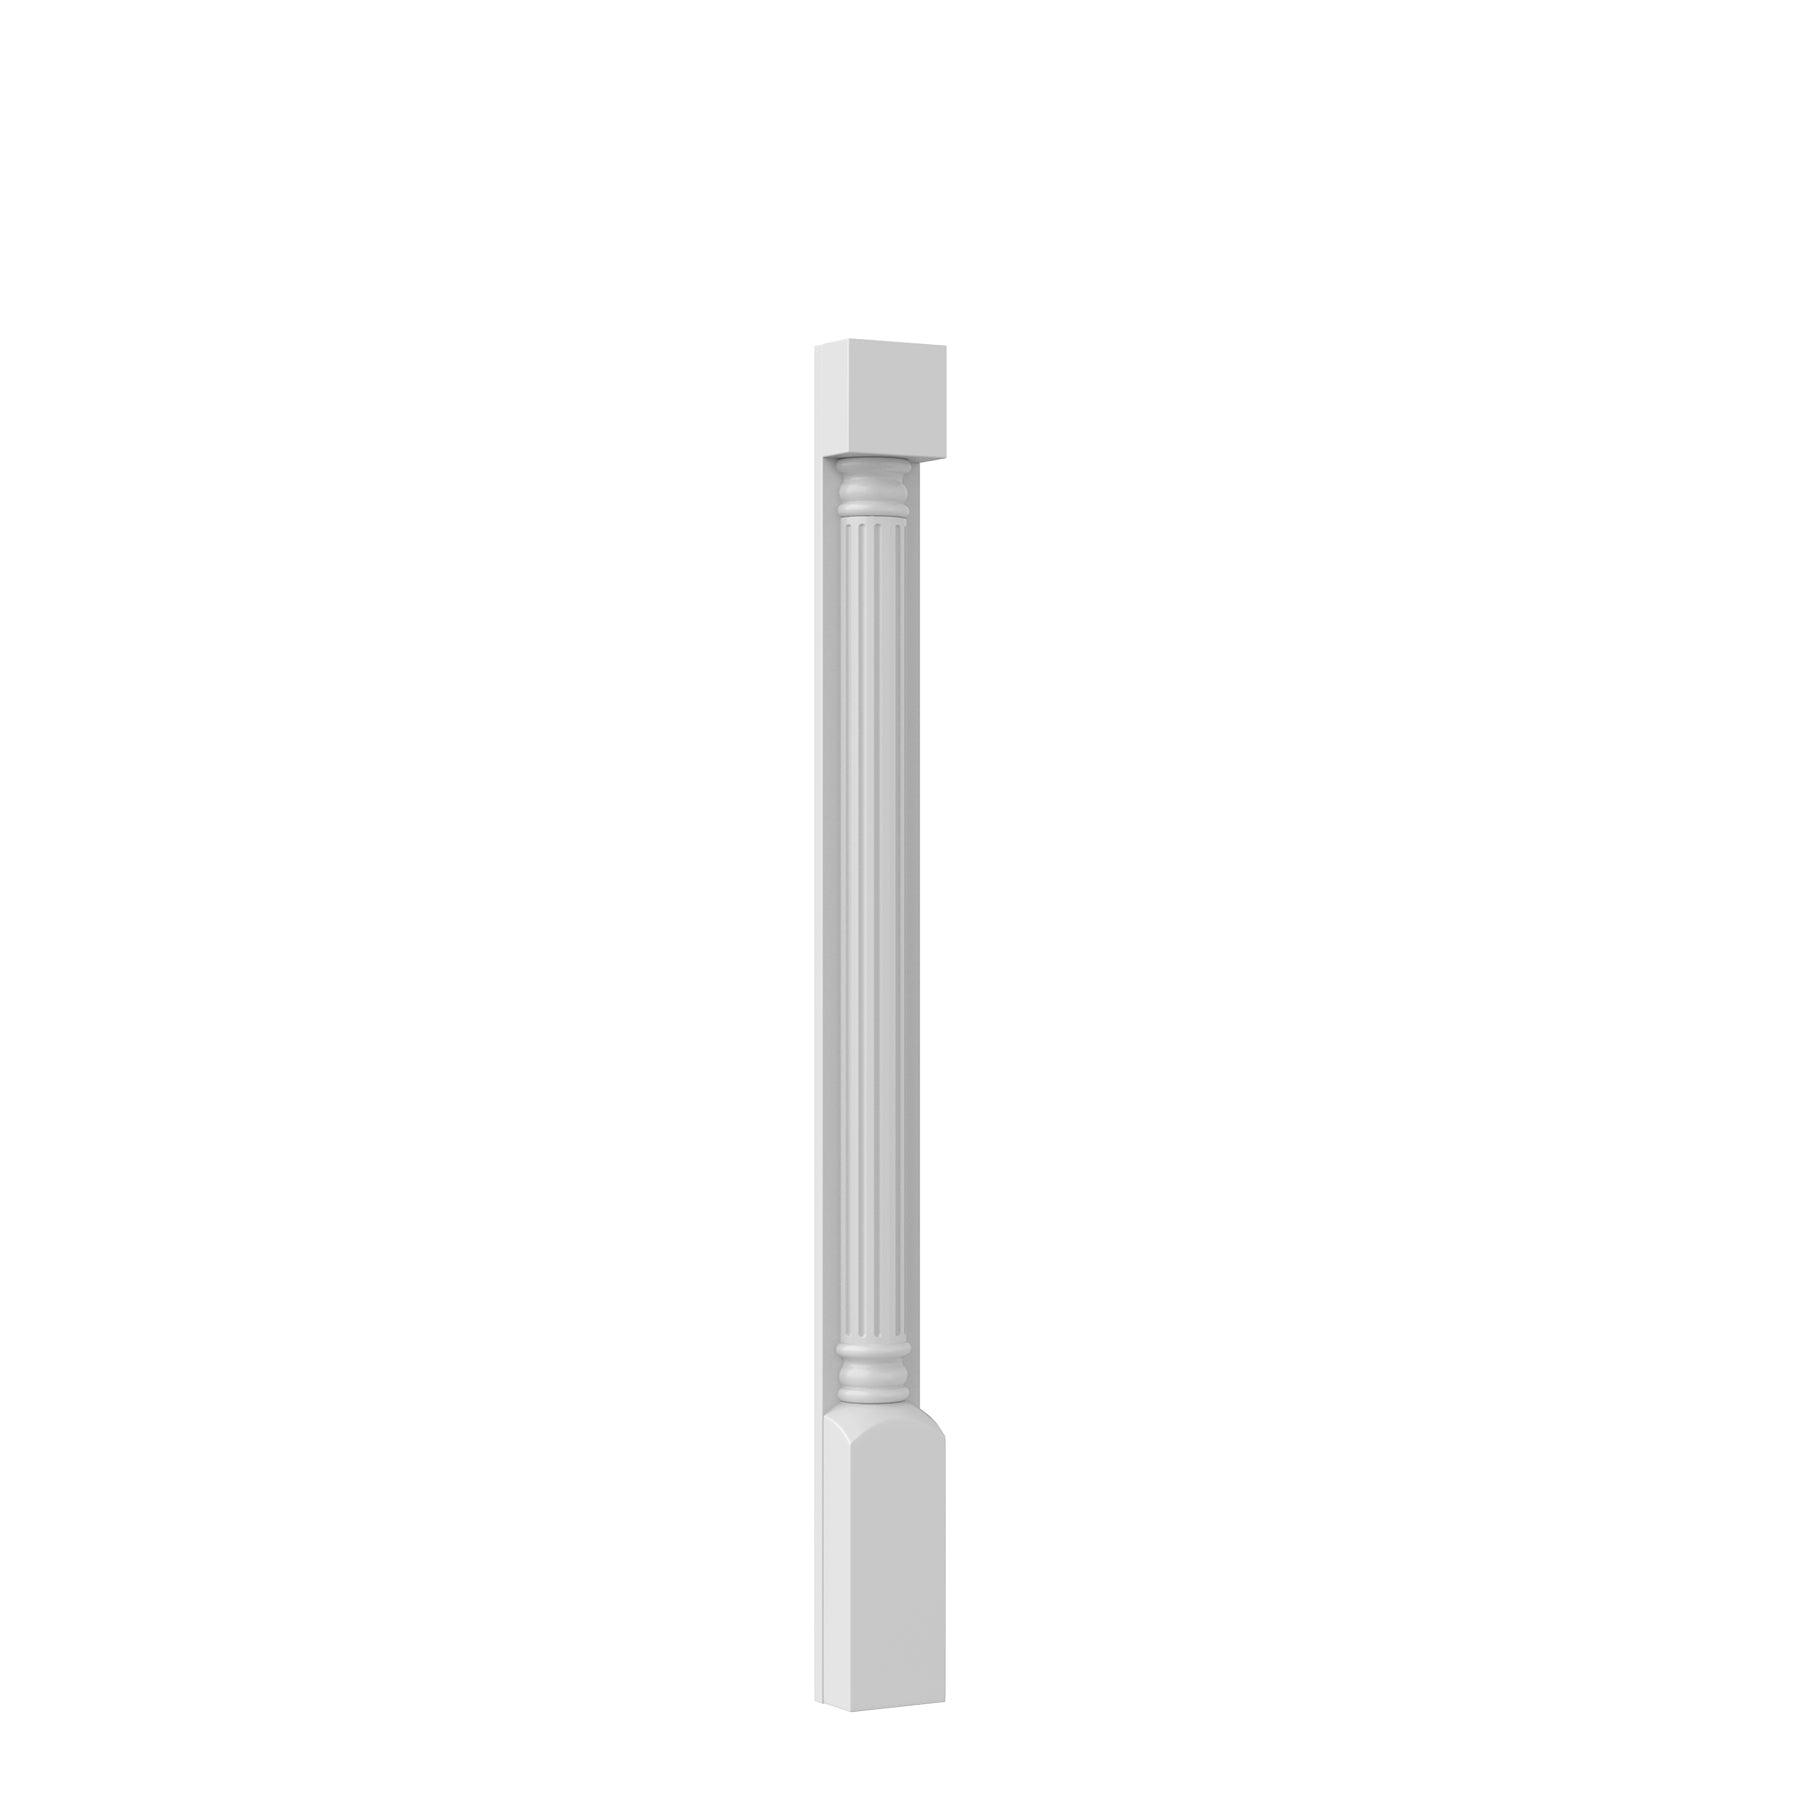 RTA - Elegant White - Spindle - Fluted | 2.5"W x 30"H x 0.5"D